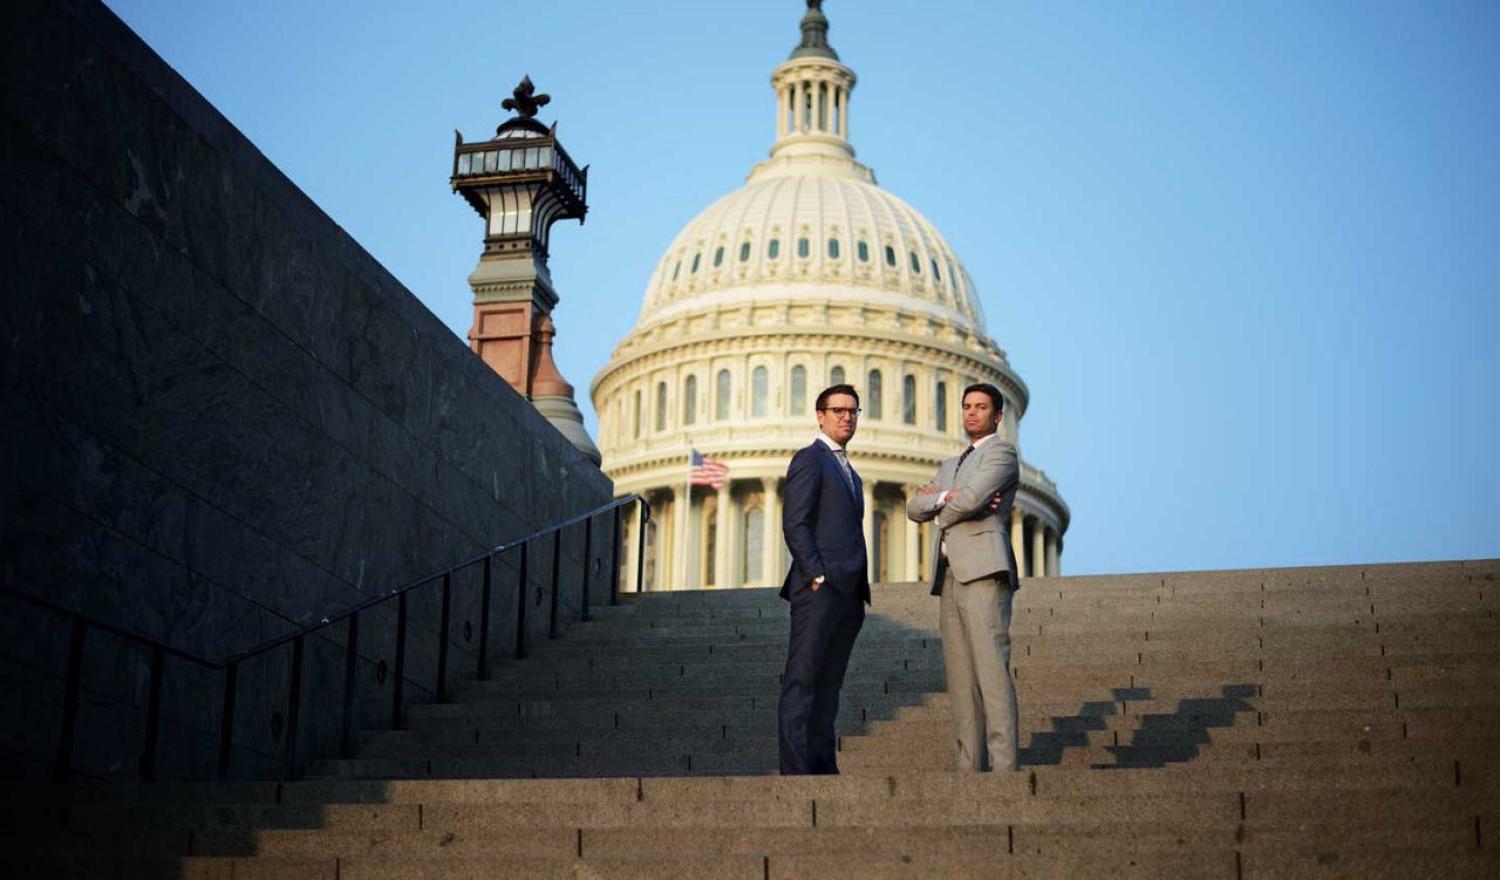 Lou Manzo ’06 and Brendan Downes ’07 photographed at the US Capital Building